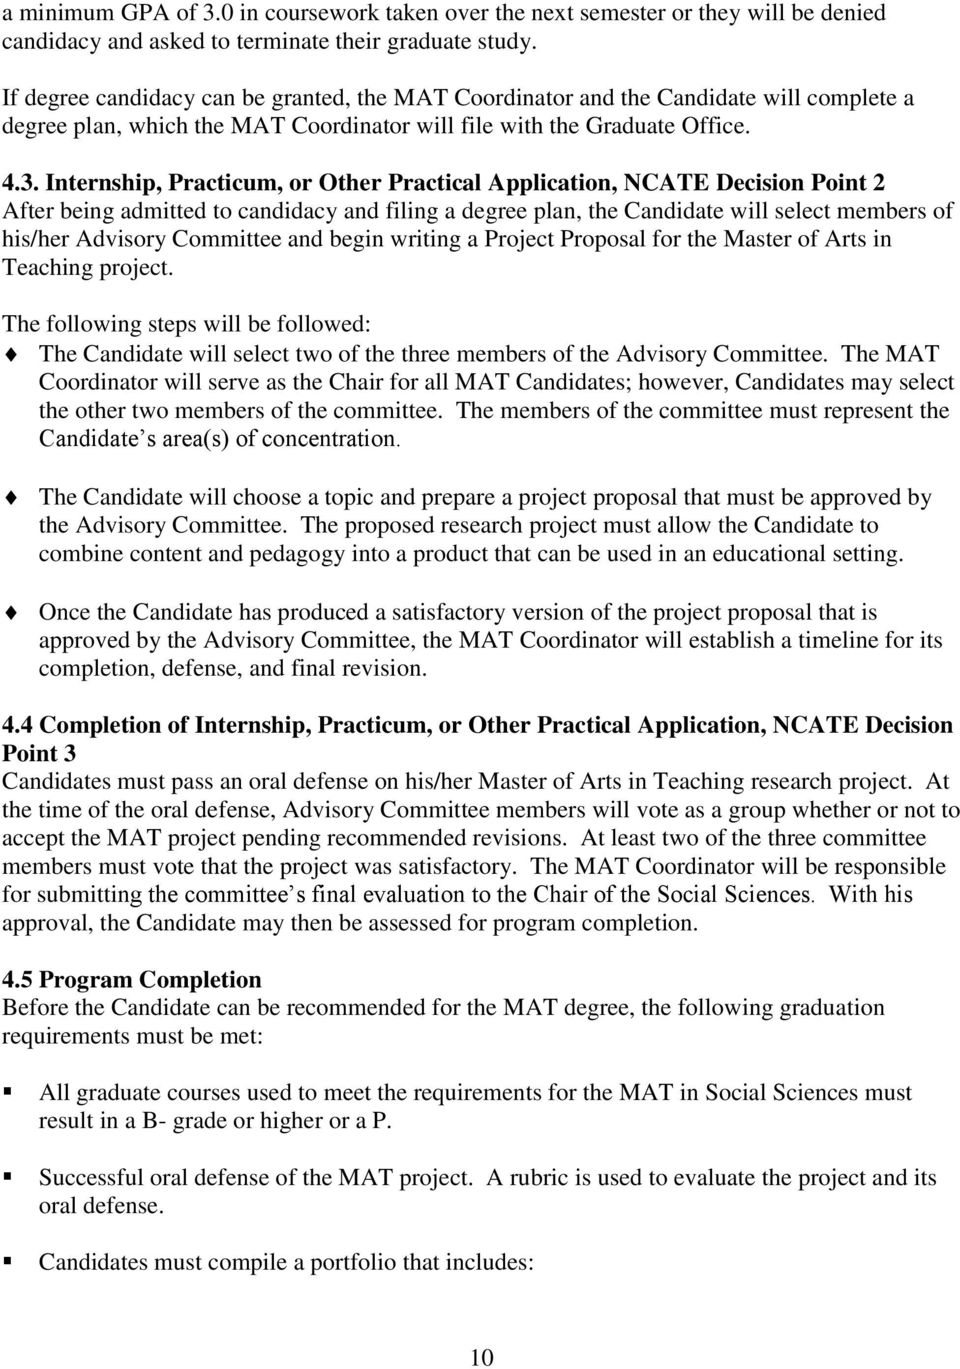 Internship, Practicum, or Other Practical Application, NCATE Decision Point 2 After being admitted to candidacy and filing a degree plan, the Candidate will select members of his/her Advisory